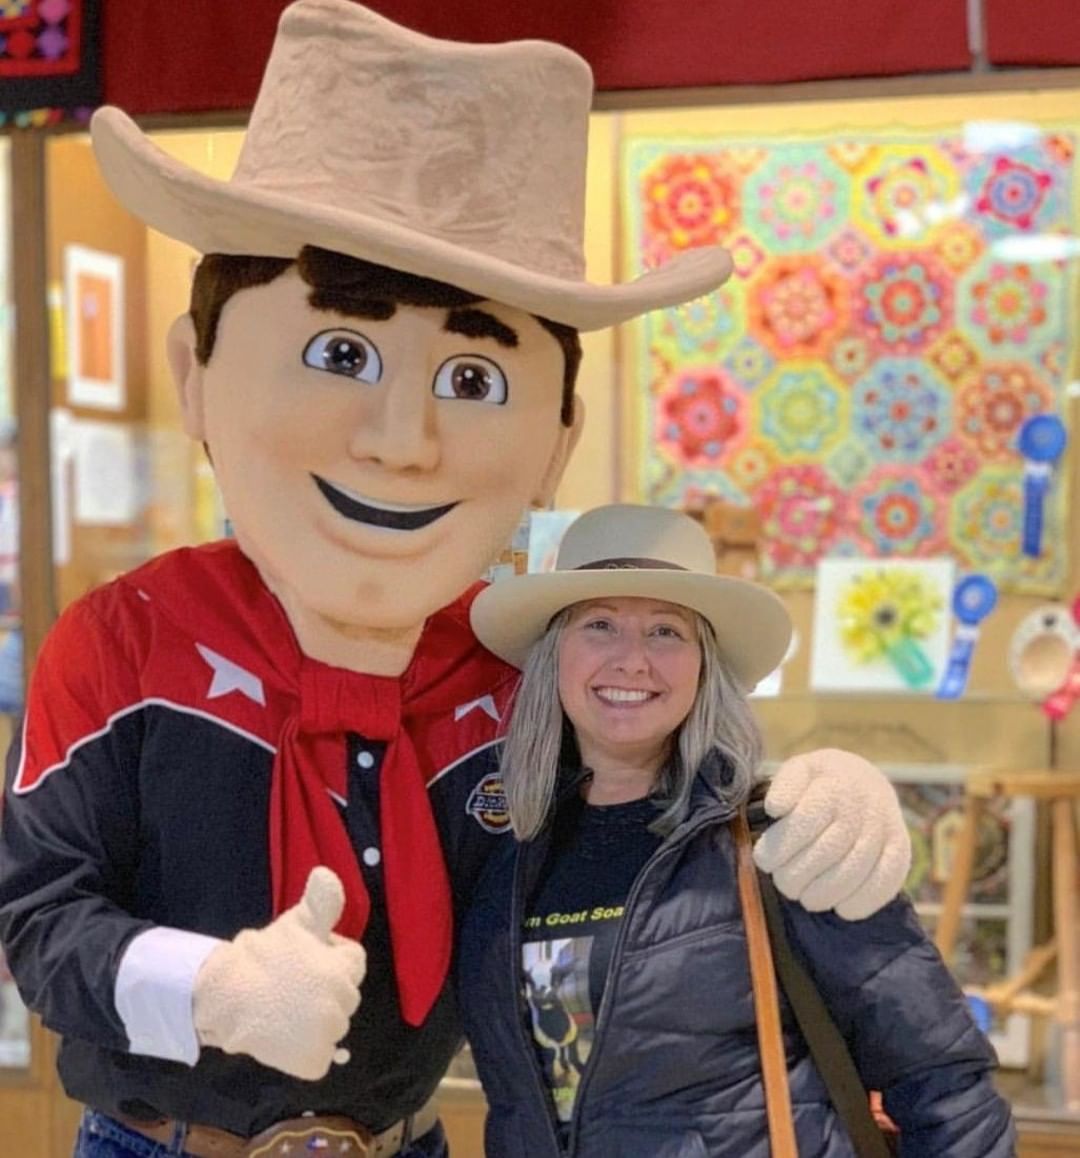 Reason #4 to compete in Arts & Crafts contests. You never know what kind of doors participating in Creative Arts might open. One of the best just might be meeting some new folks you start to call friends! #CreativeArts #BigTex #Repost 📸: GlamGoatSoap